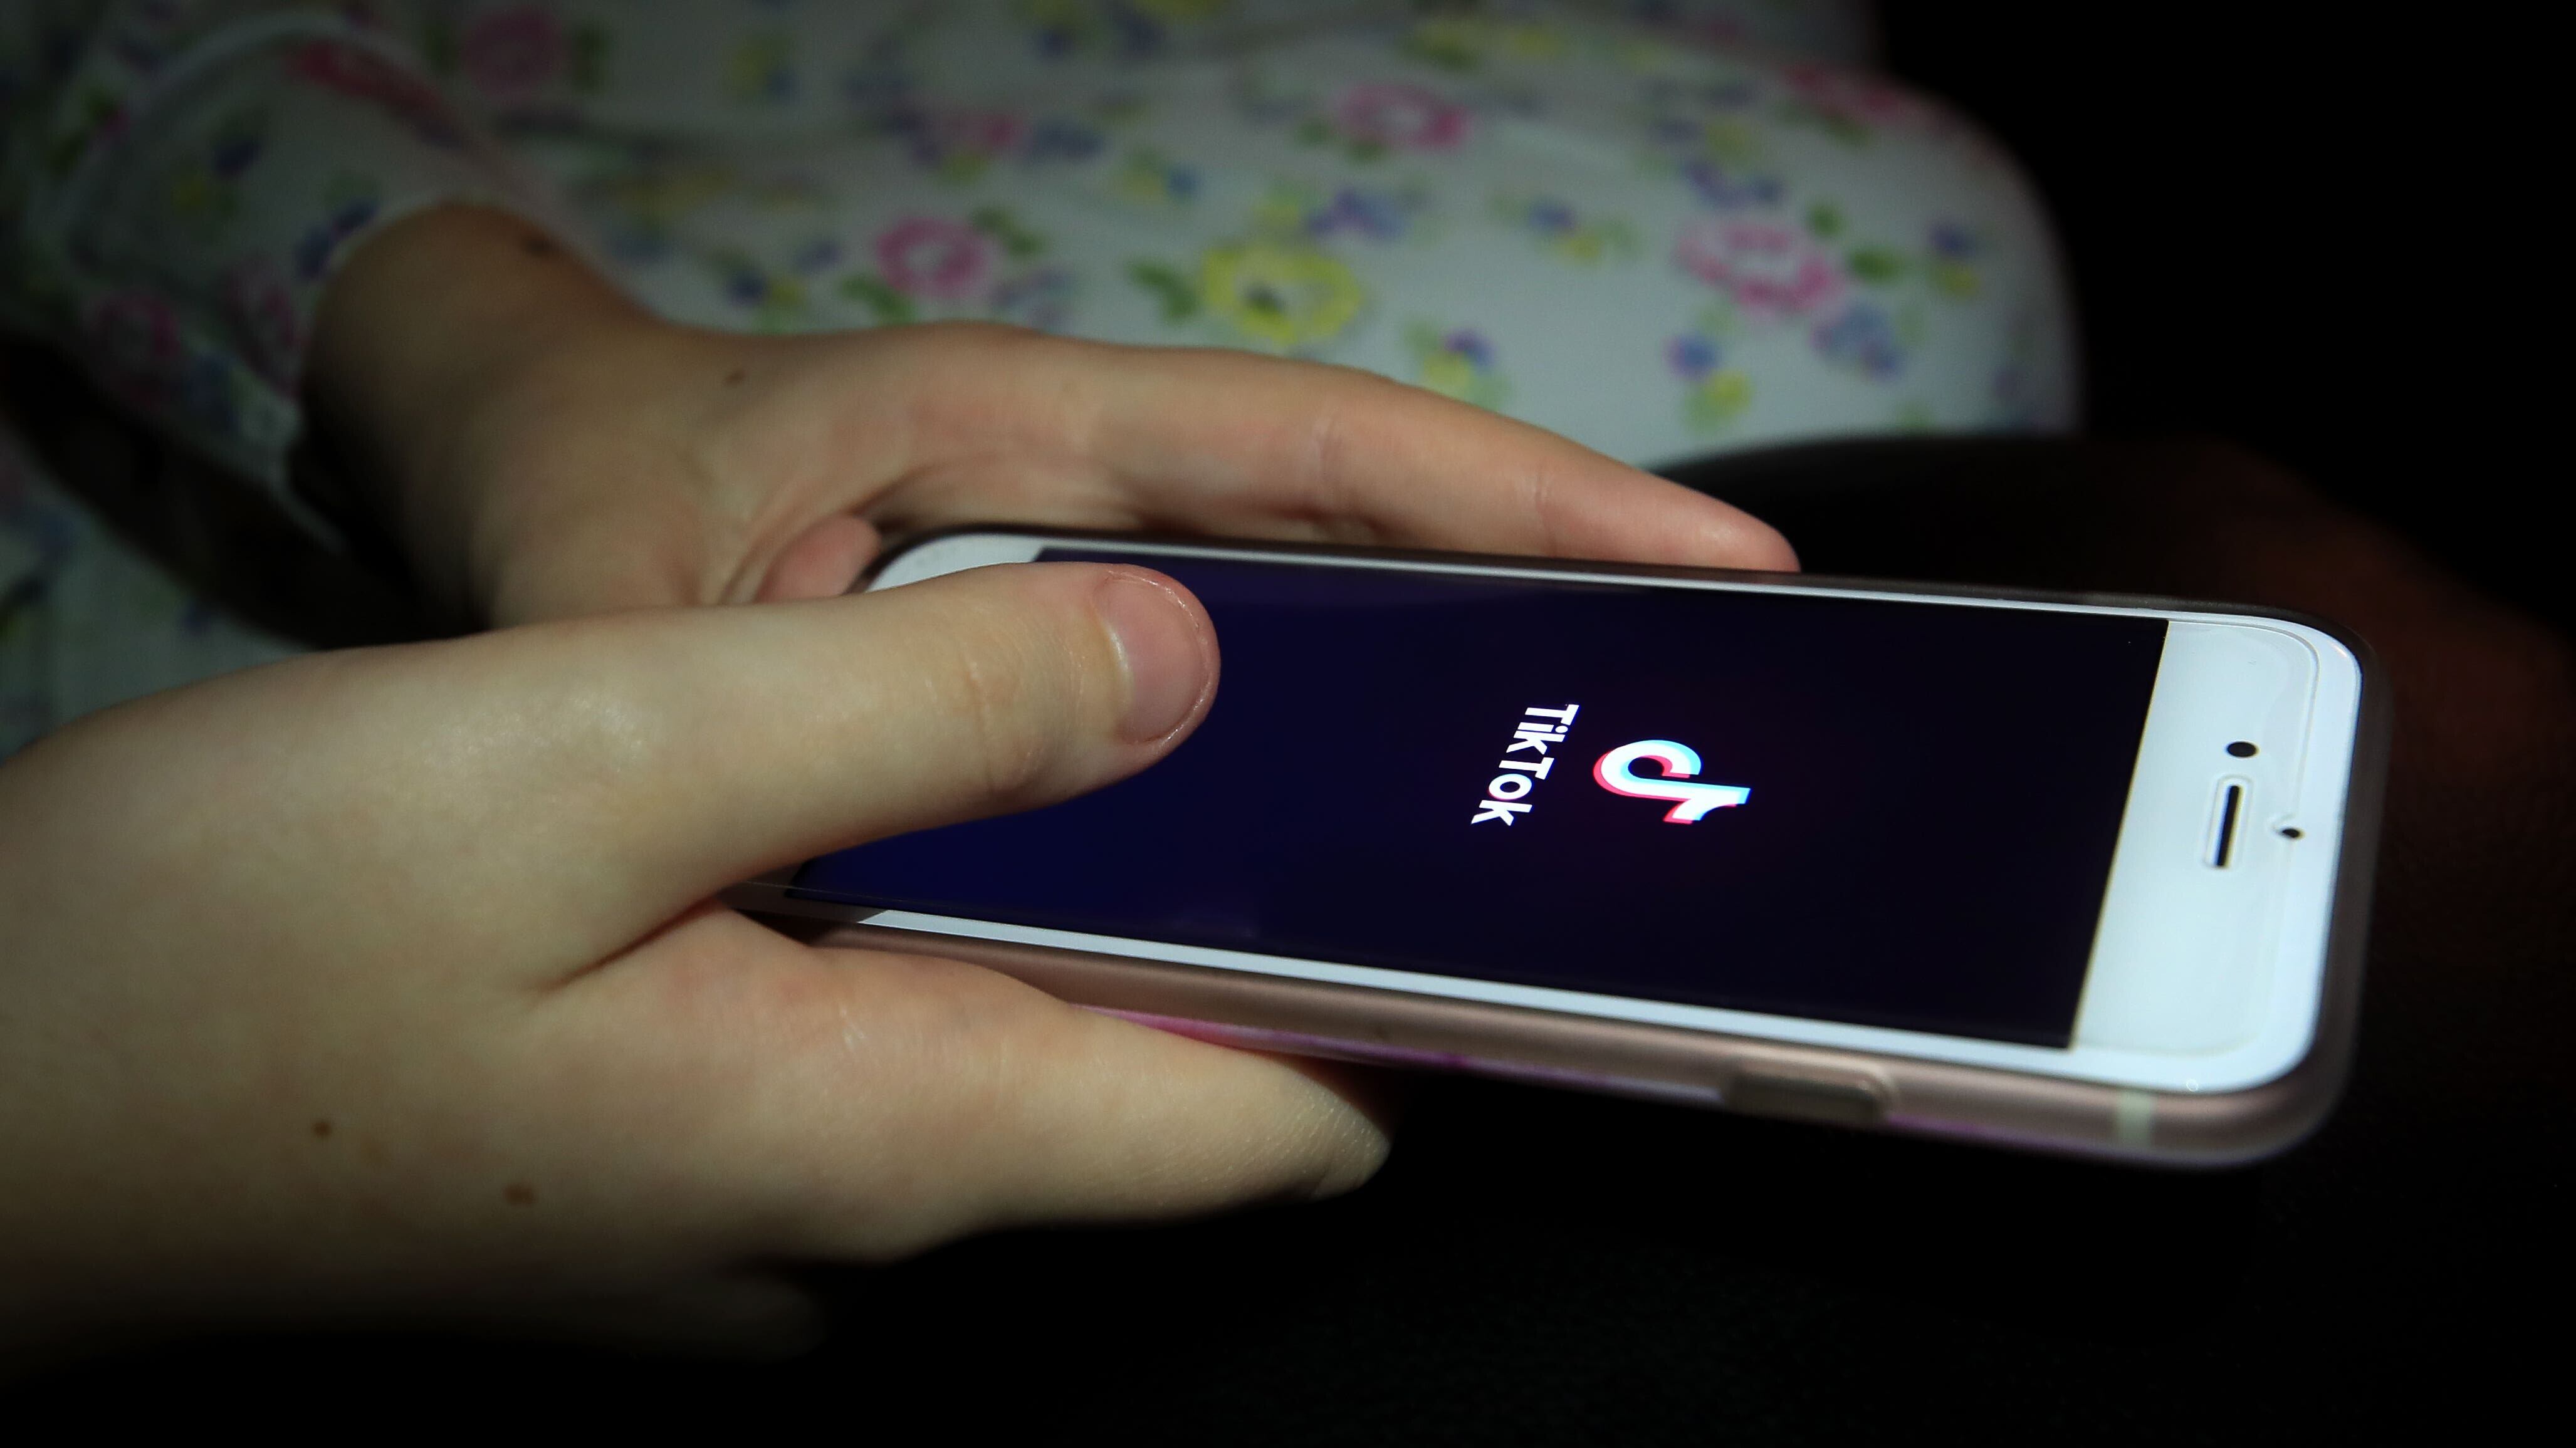 A new study from the Center for Countering Digital Hate says it saw harmful content being recommended to accounts within minutes of joining TikTok.